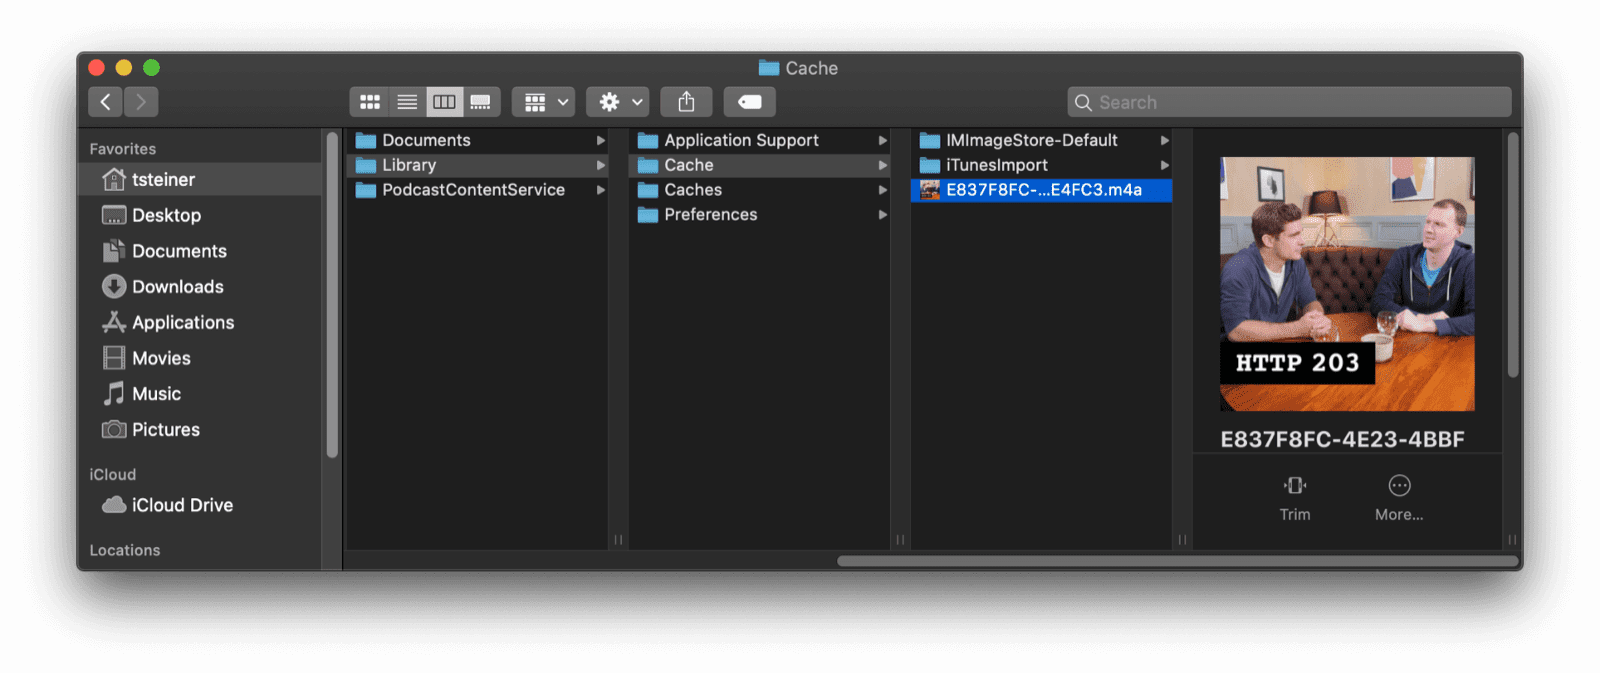 The macOS Finder navigated to the Podcasts app's system directory.